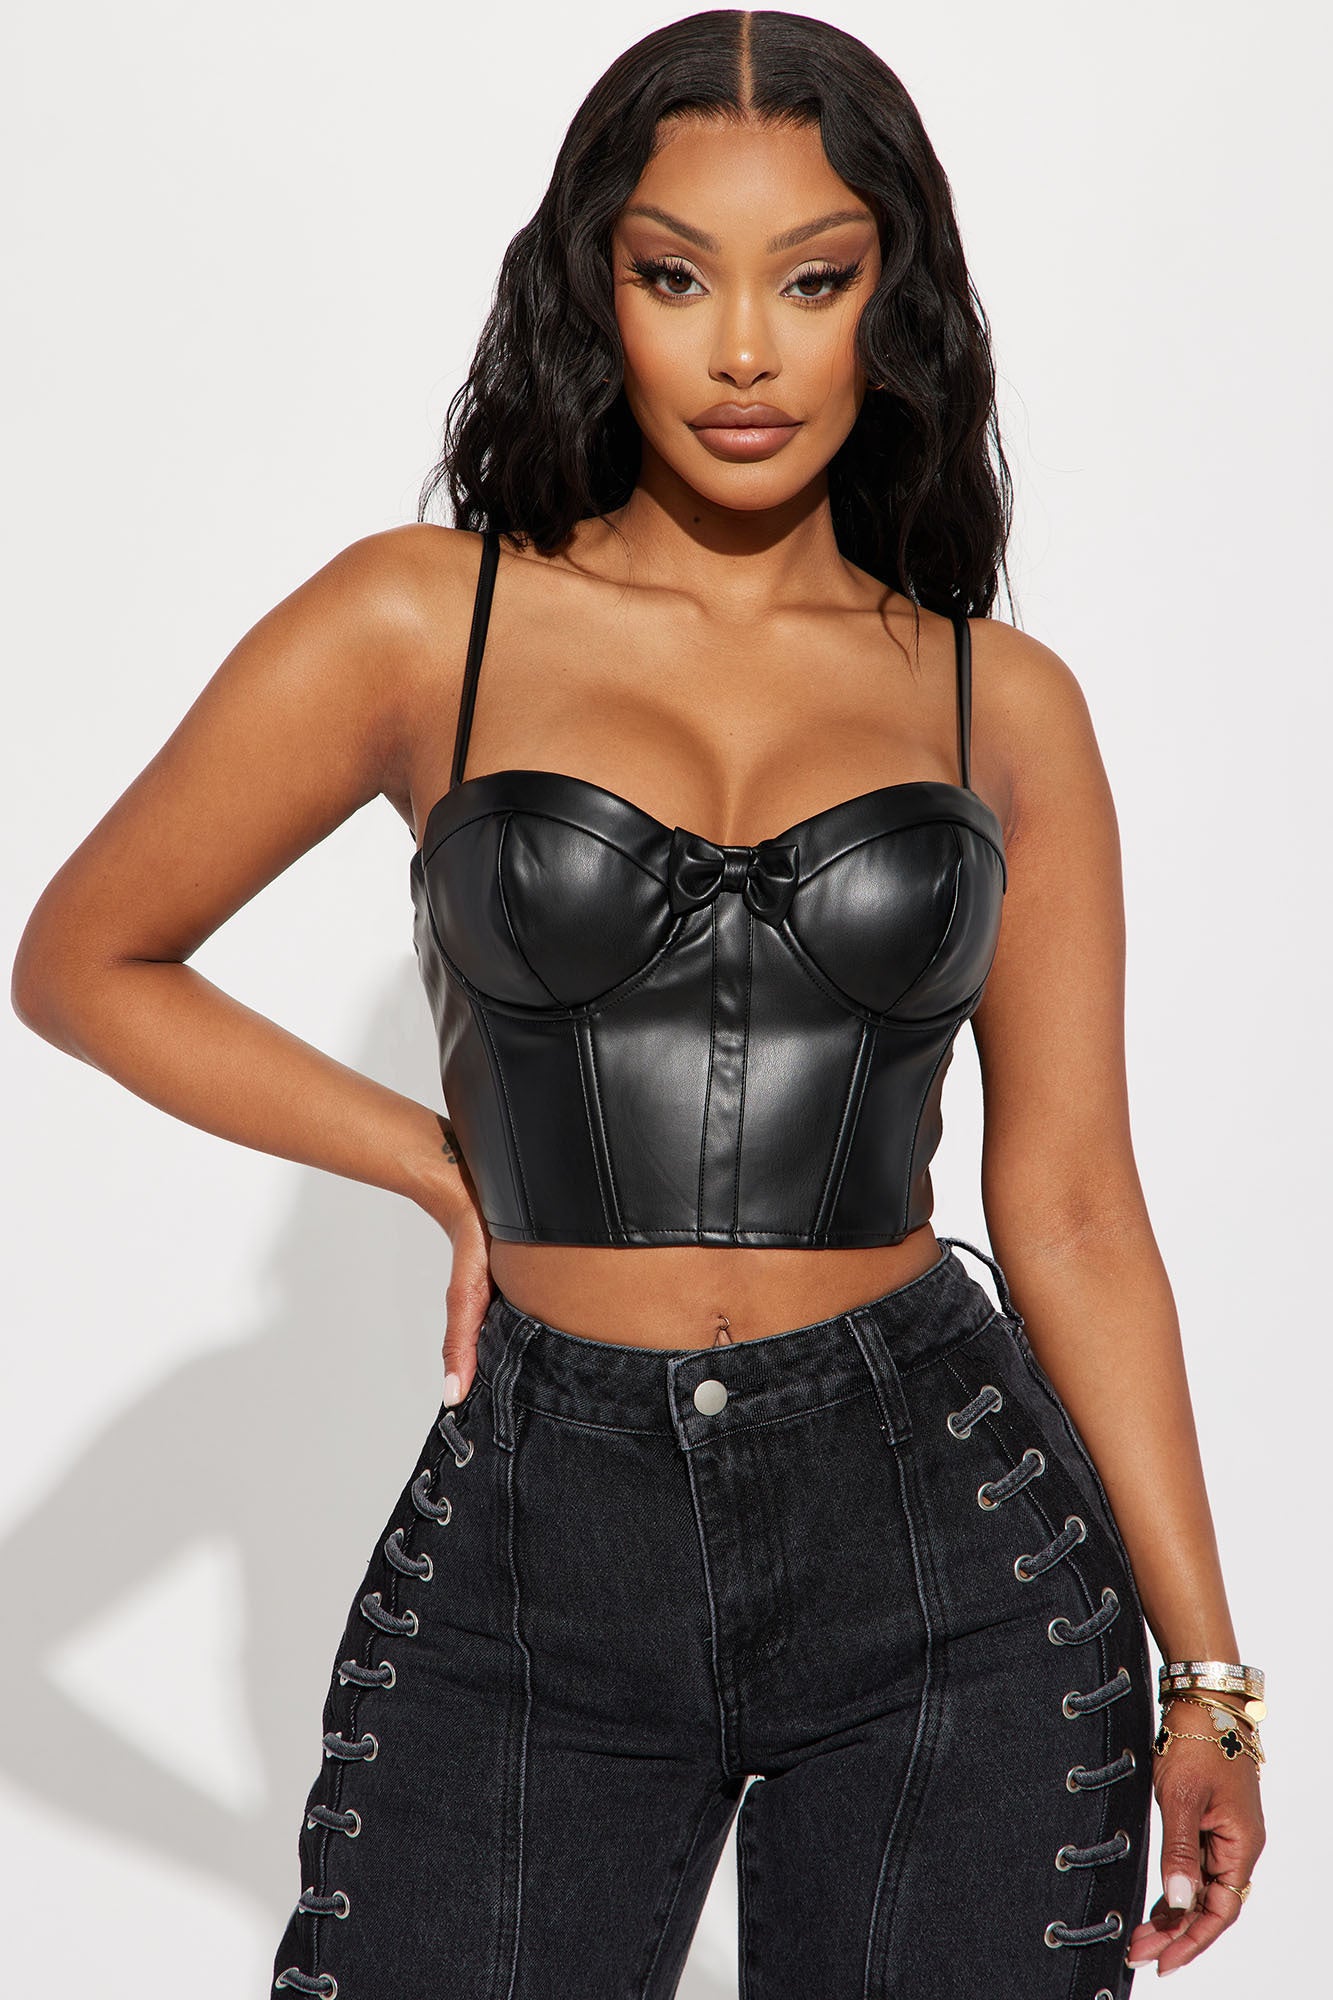 MISS MOLY Womens PU Leather Bustier Crop Top Gothic Punk Push Up